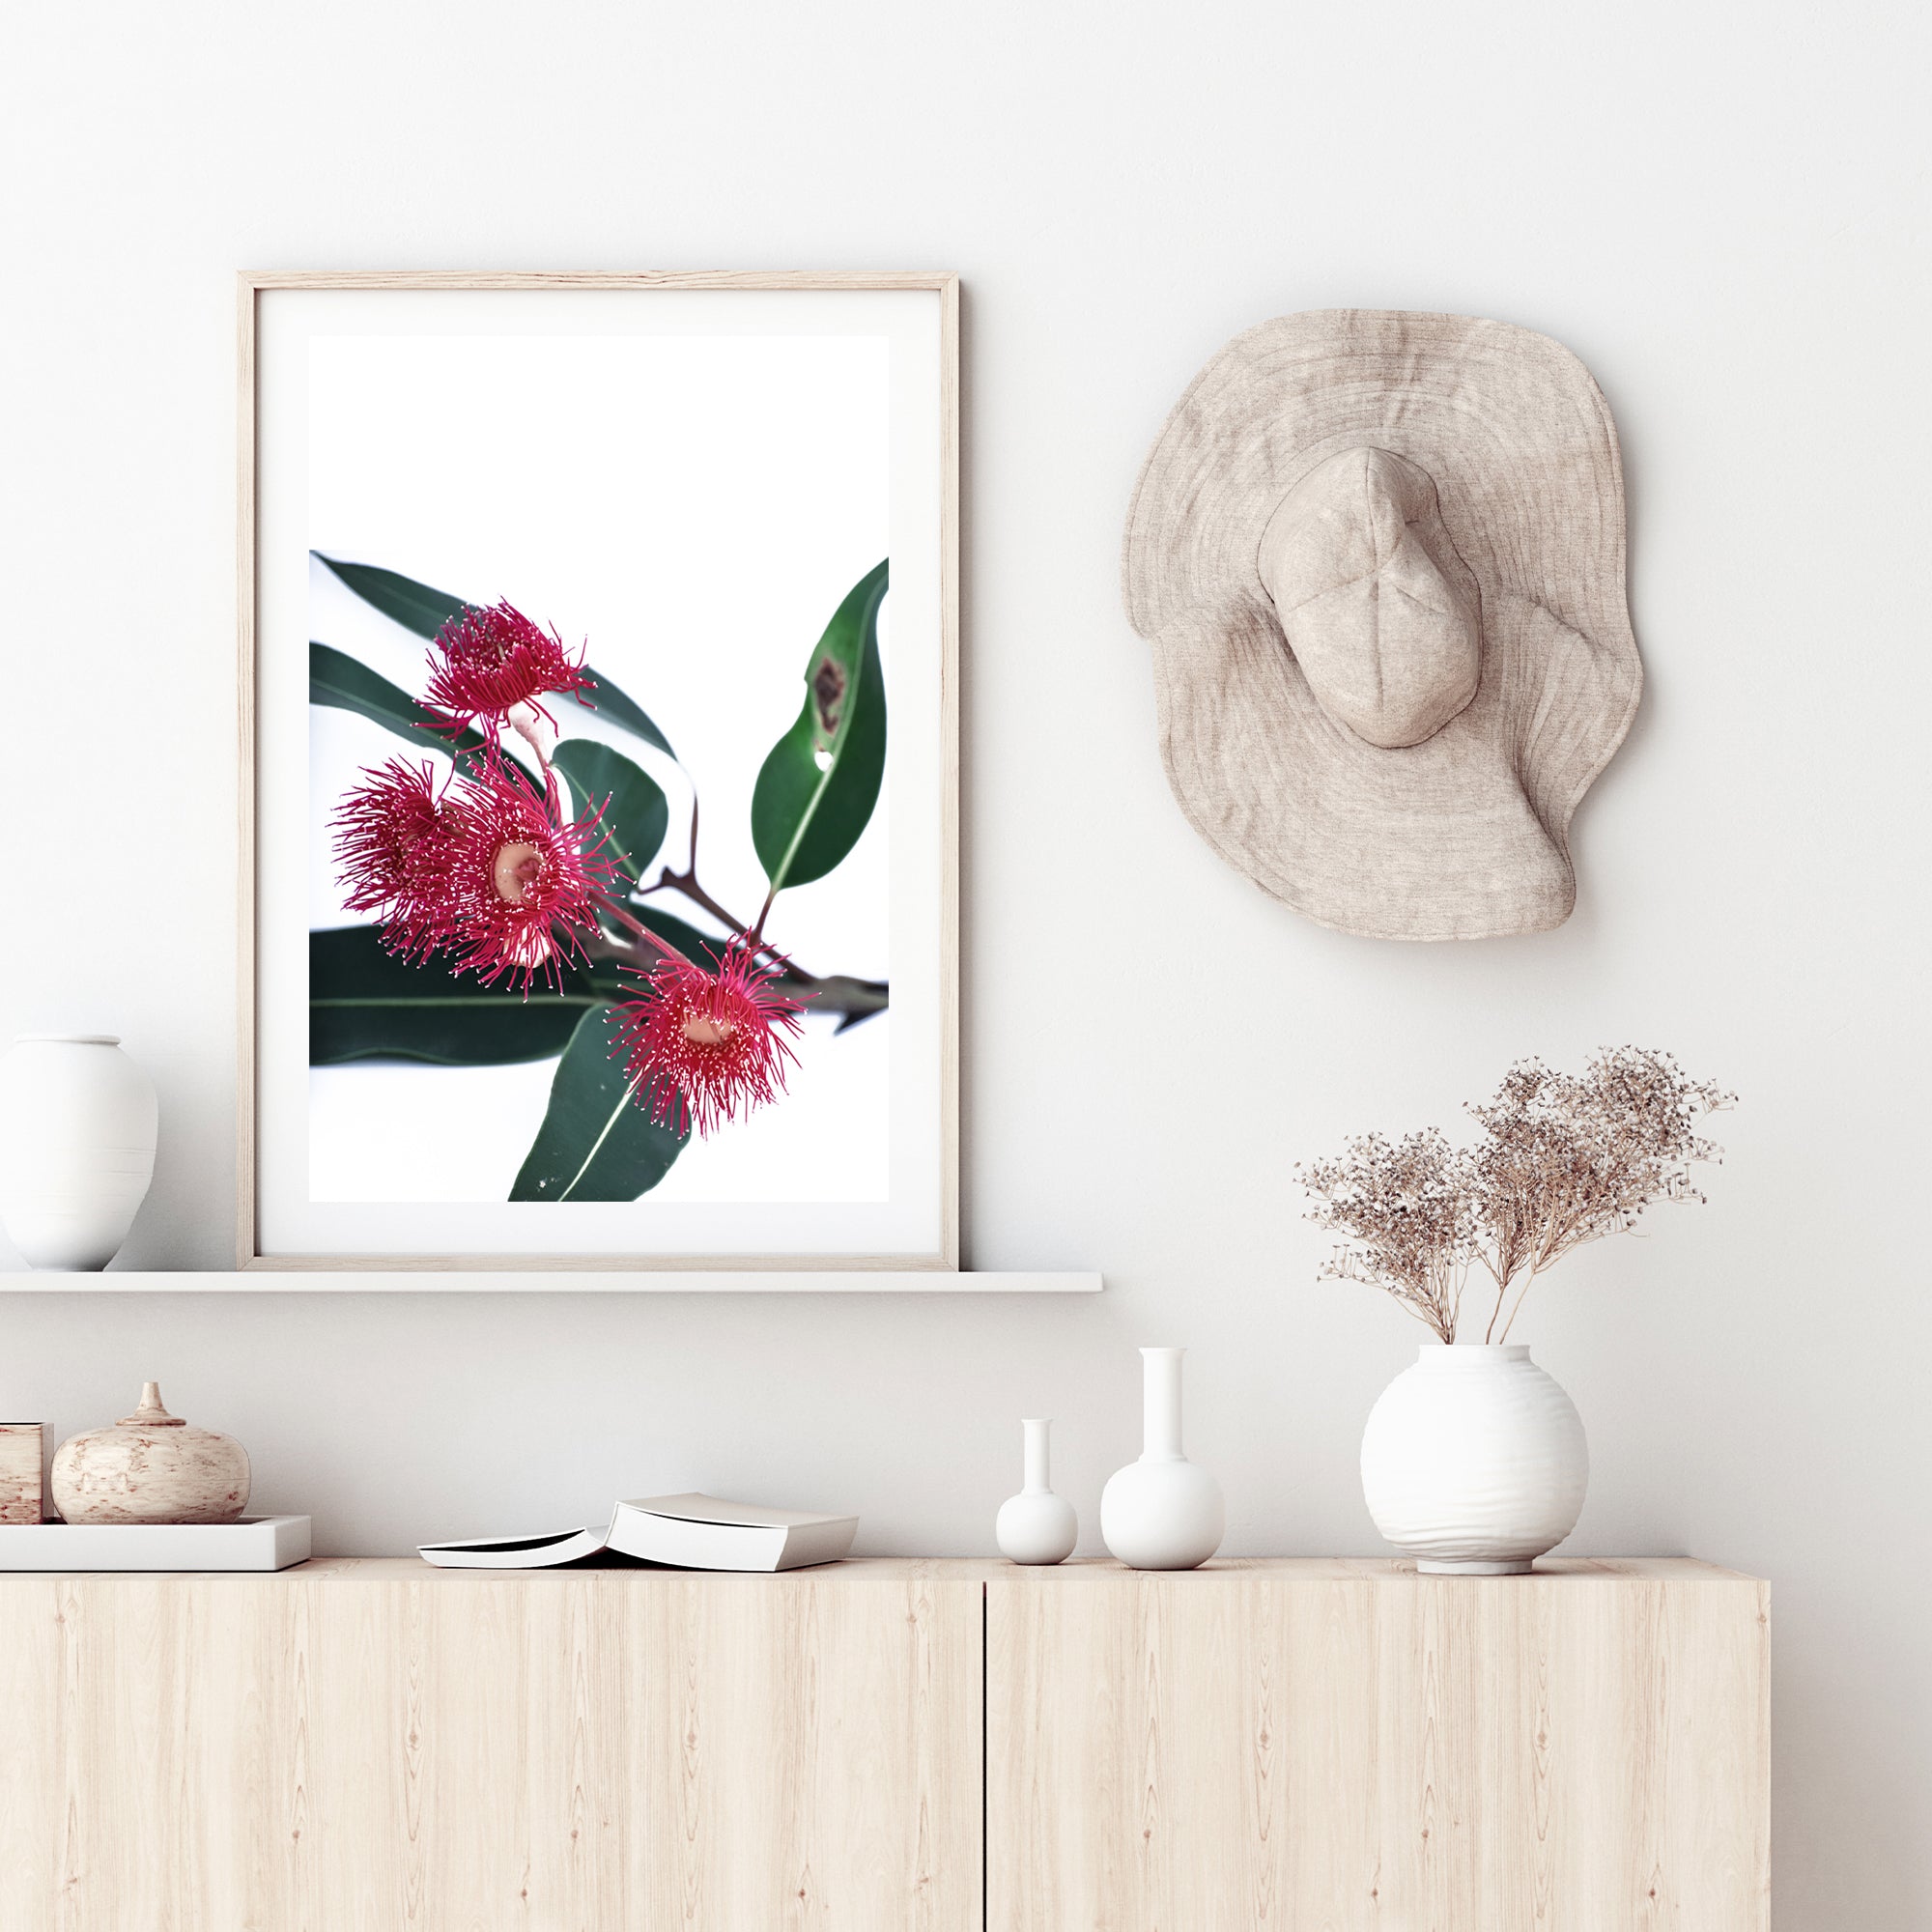 A stretched canvas floral wall art print featuring beautiful red wild flowers A with green eucalyptus leaves, available framed or unframed.